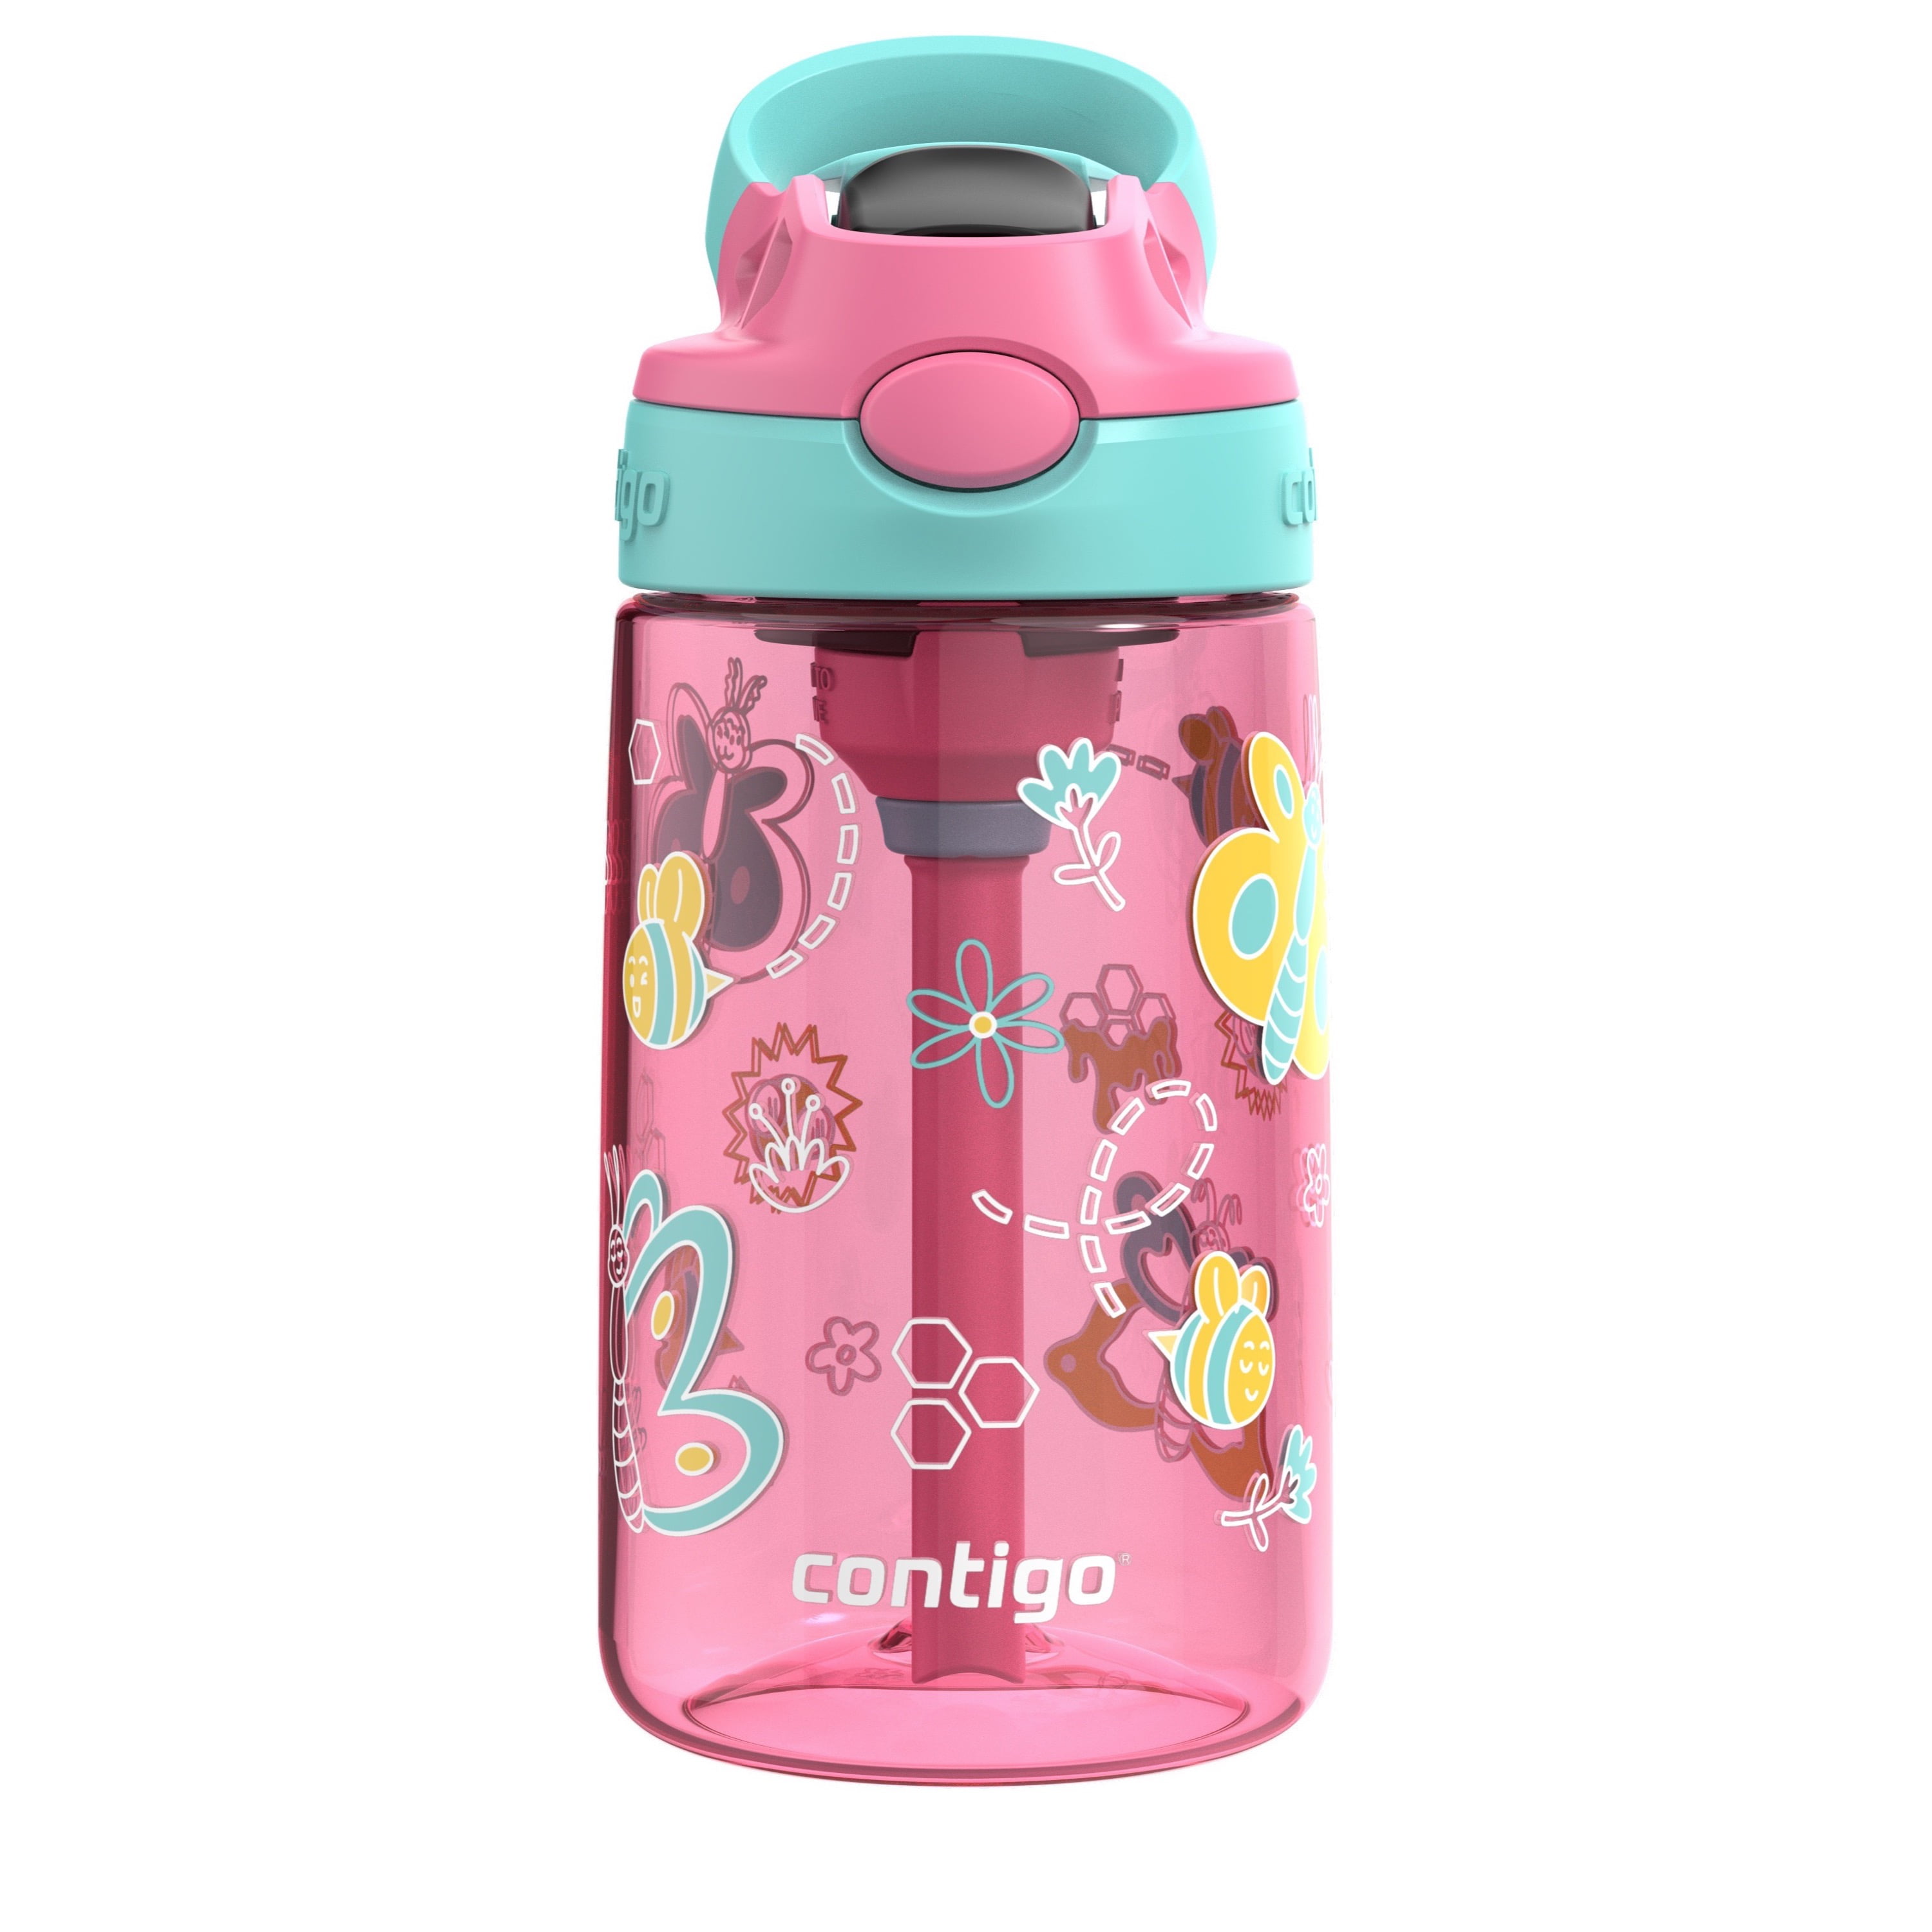  Contigo Aubrey Kids Stainless Steel Water Bottle with  Spill-Proof Lid, Cleanable 13oz Kids Water Bottle Keeps Drinks Cold up to  14 Hours, Taro/Juniper : Baby